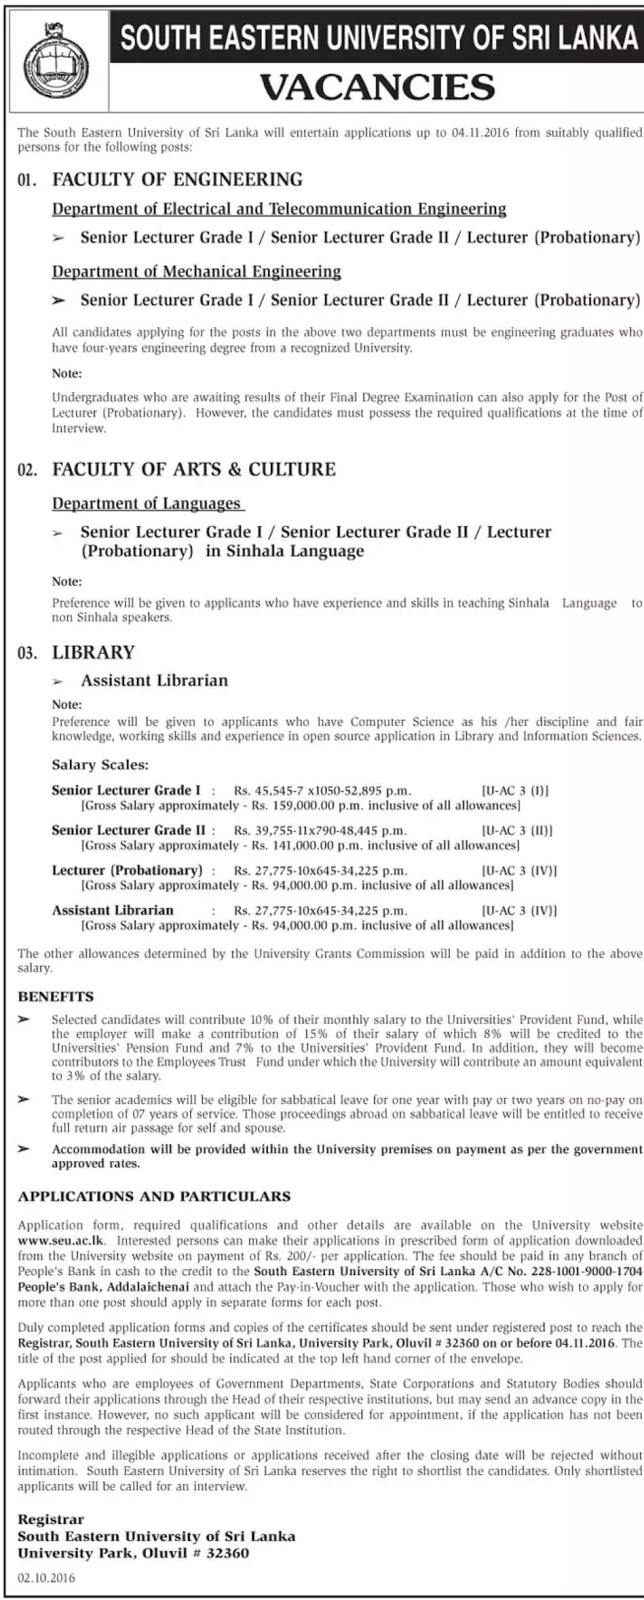 Senior Lecturer / Lecturer / Assistant Librarian Vacancies in South Eastern University